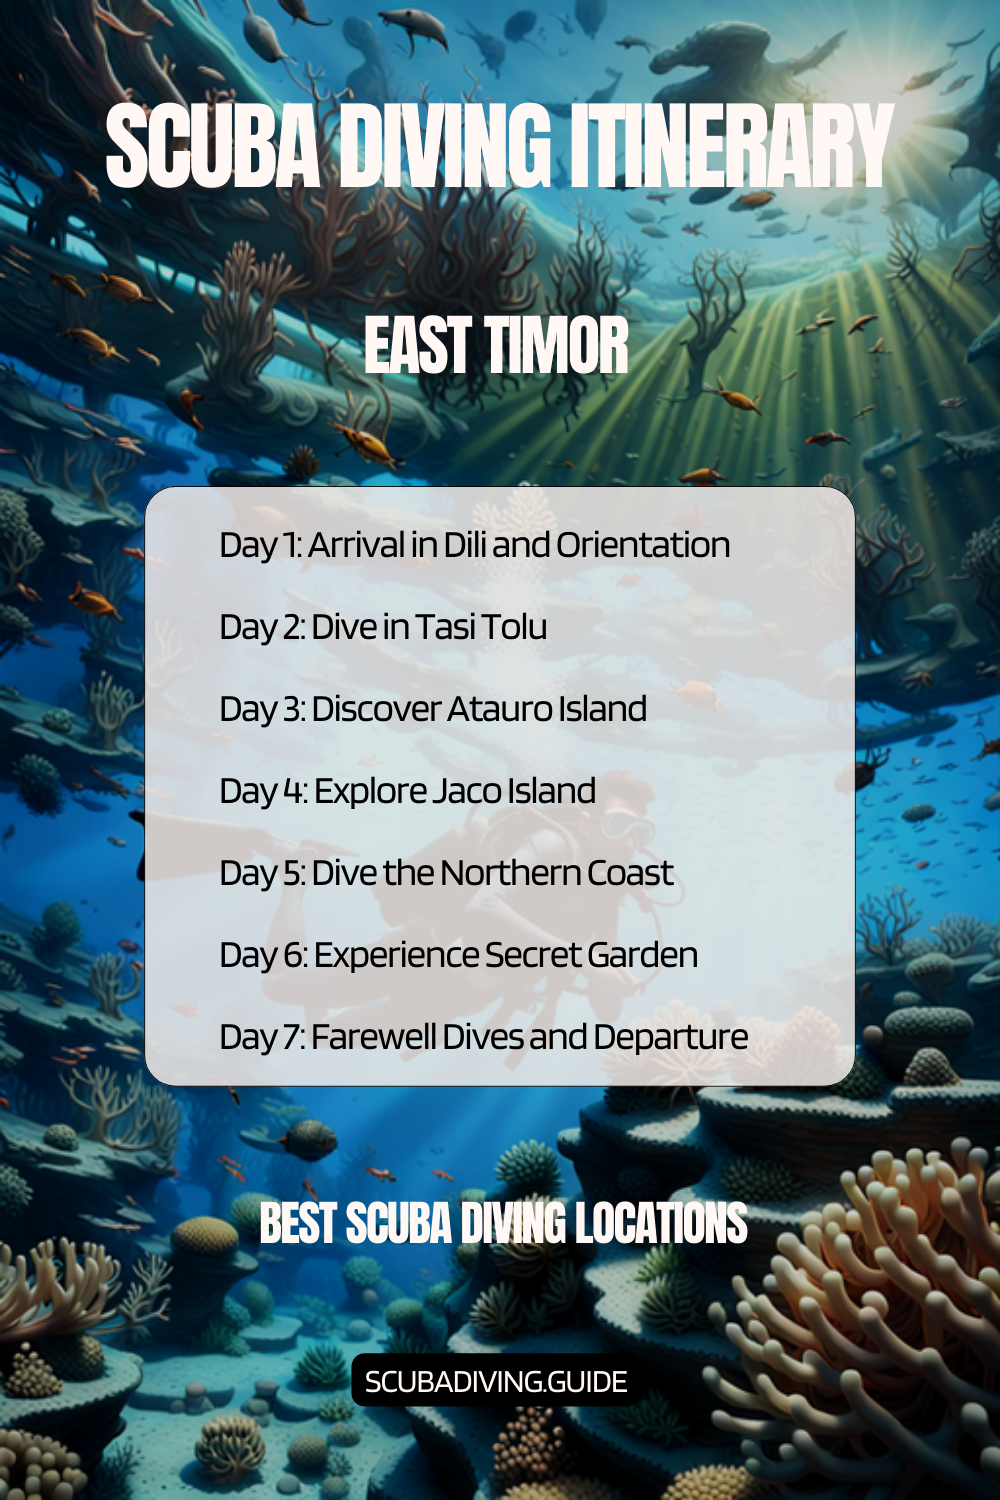 East Timor Recommended Scuba Diving Itinerary